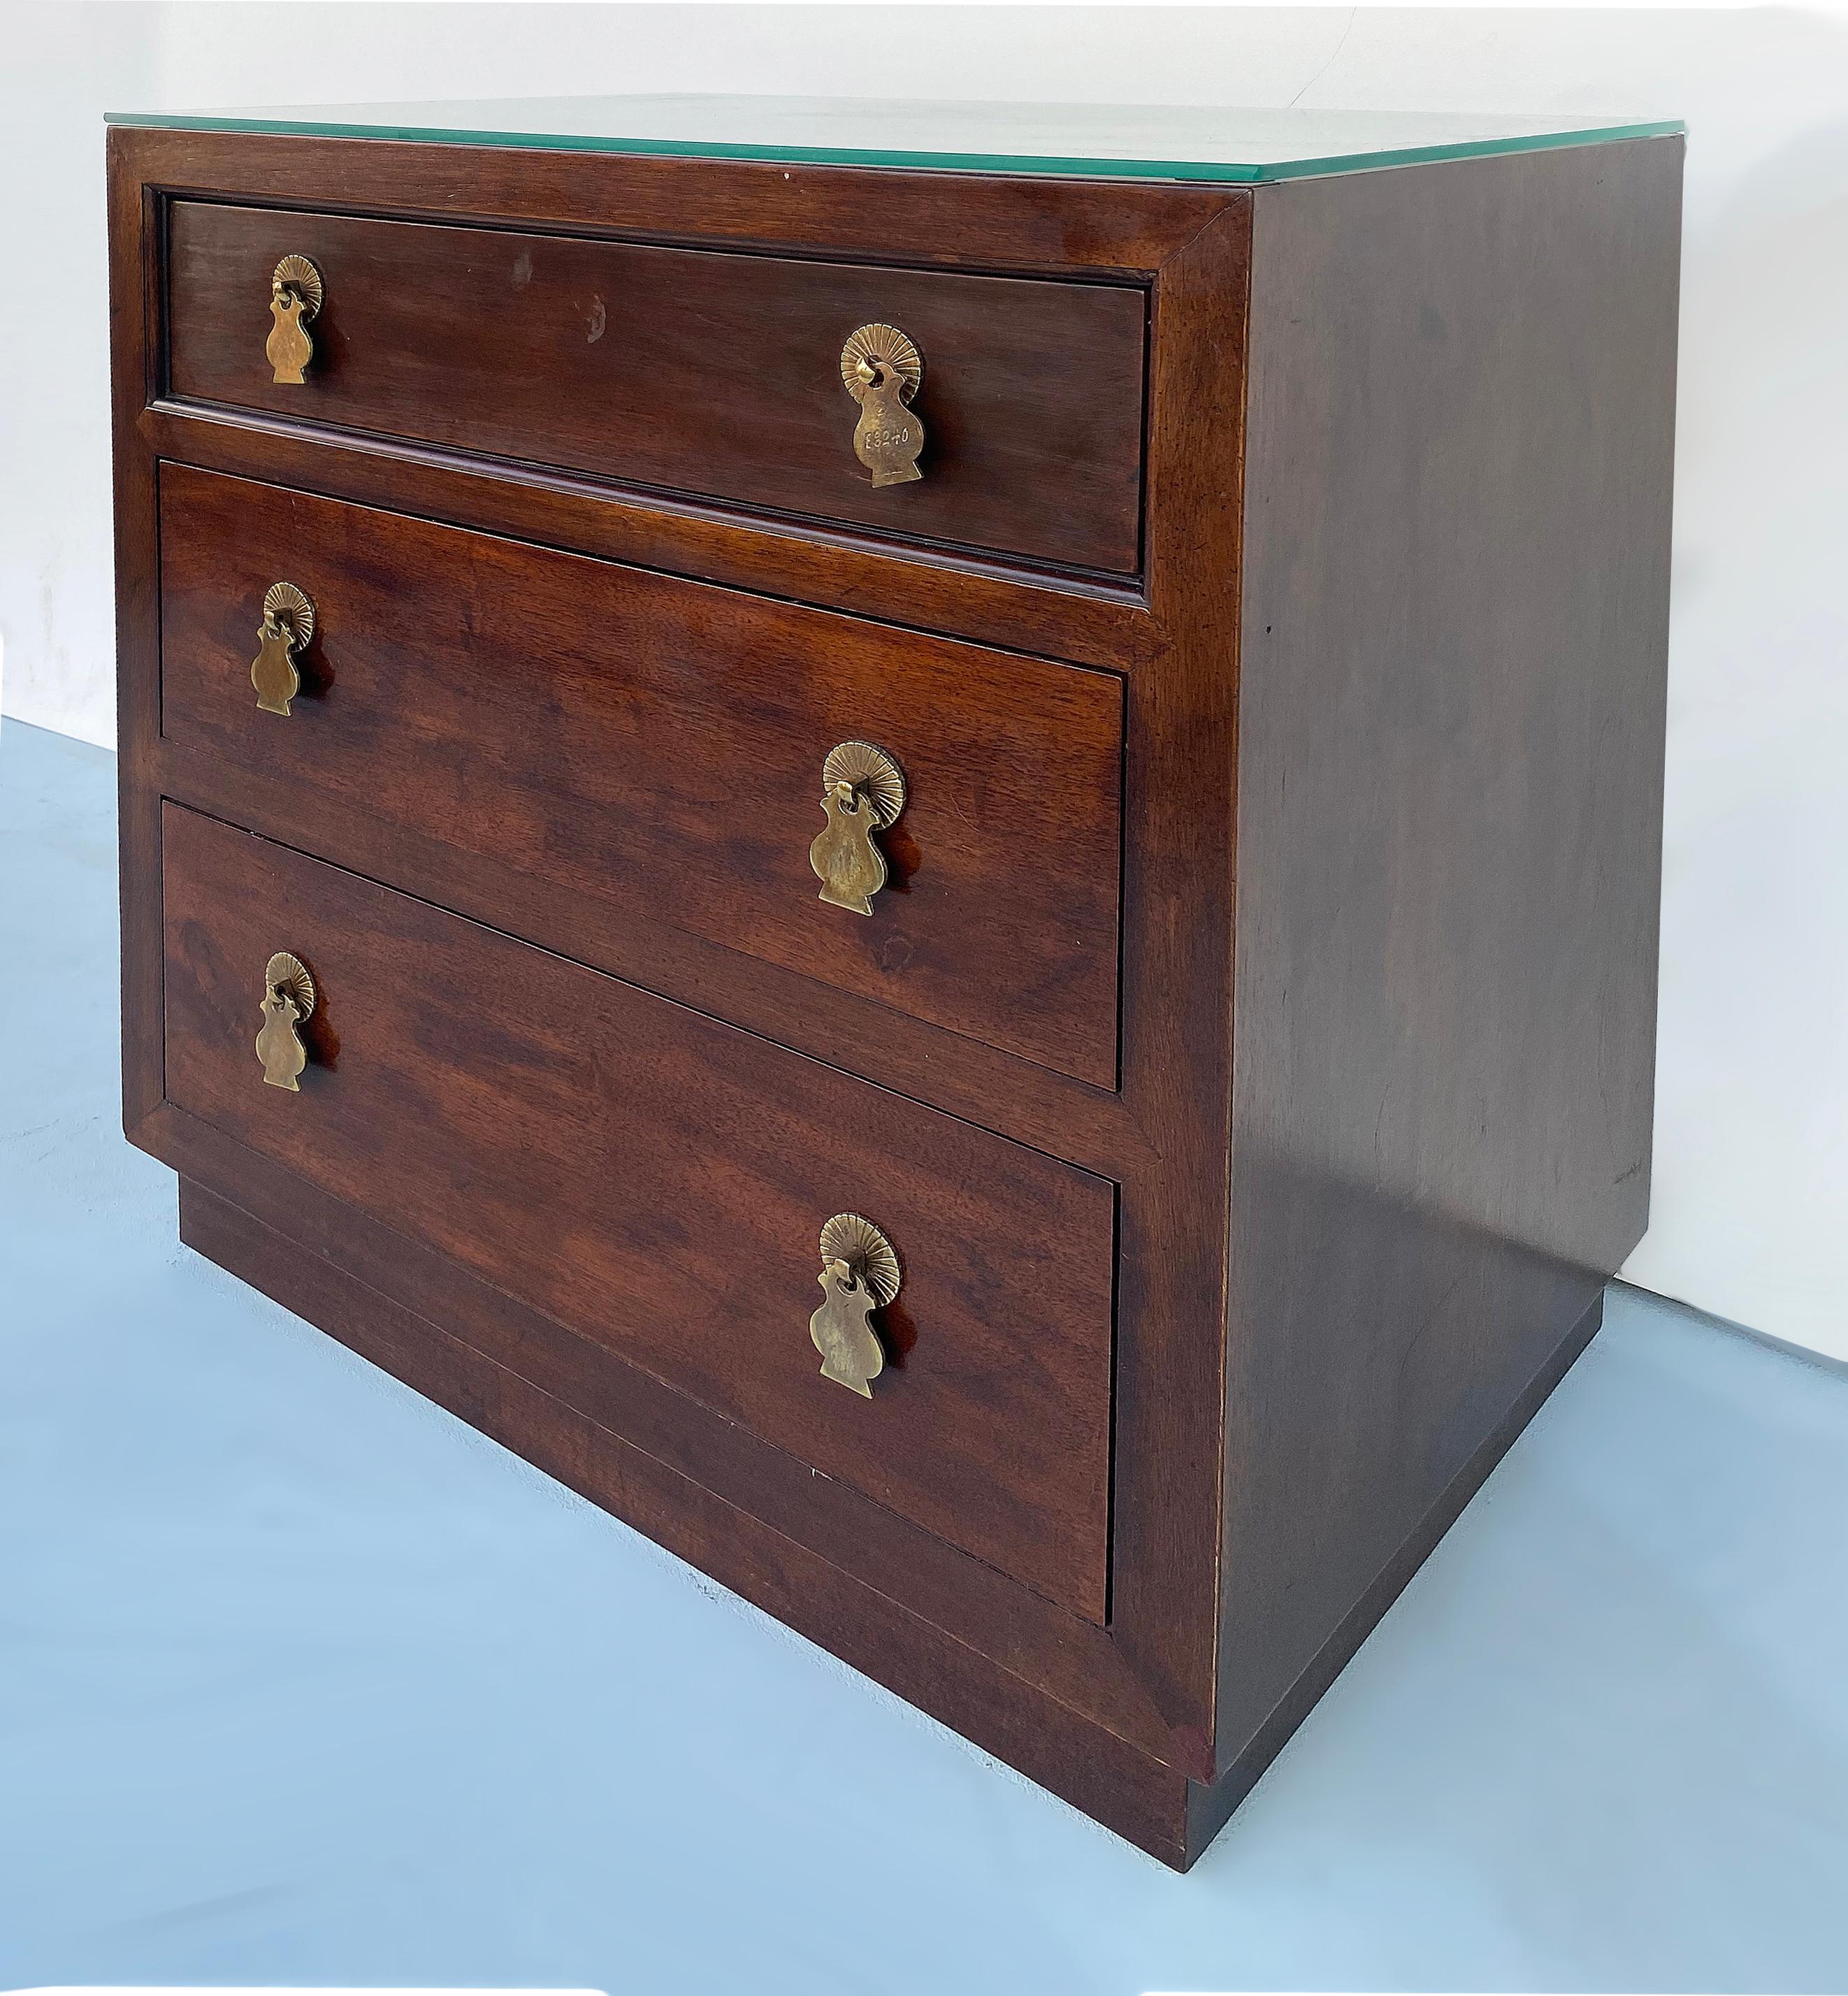 Henredon 3 drawer chests nightstands with brass hardware - Pair

Offered for sale is a pair of Henredon three-drawer chests with brass hardware that can be used as chests or nightstands. The unusual drop pulls are quite interesting and are marked